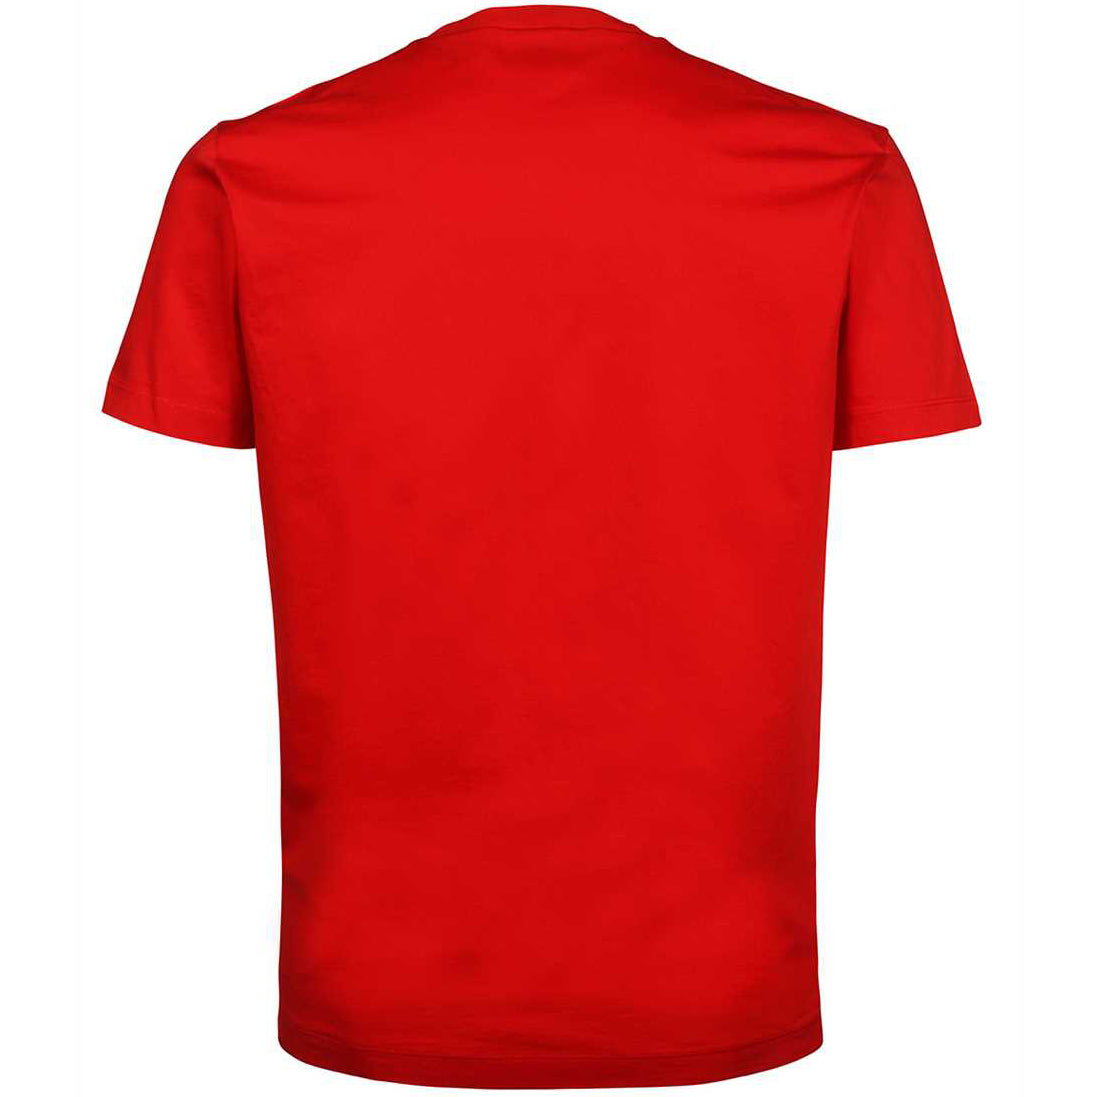 Dsquared2 Men&#39;s &quot;I CAN&#39;T&quot; Logo T-Shirt Red